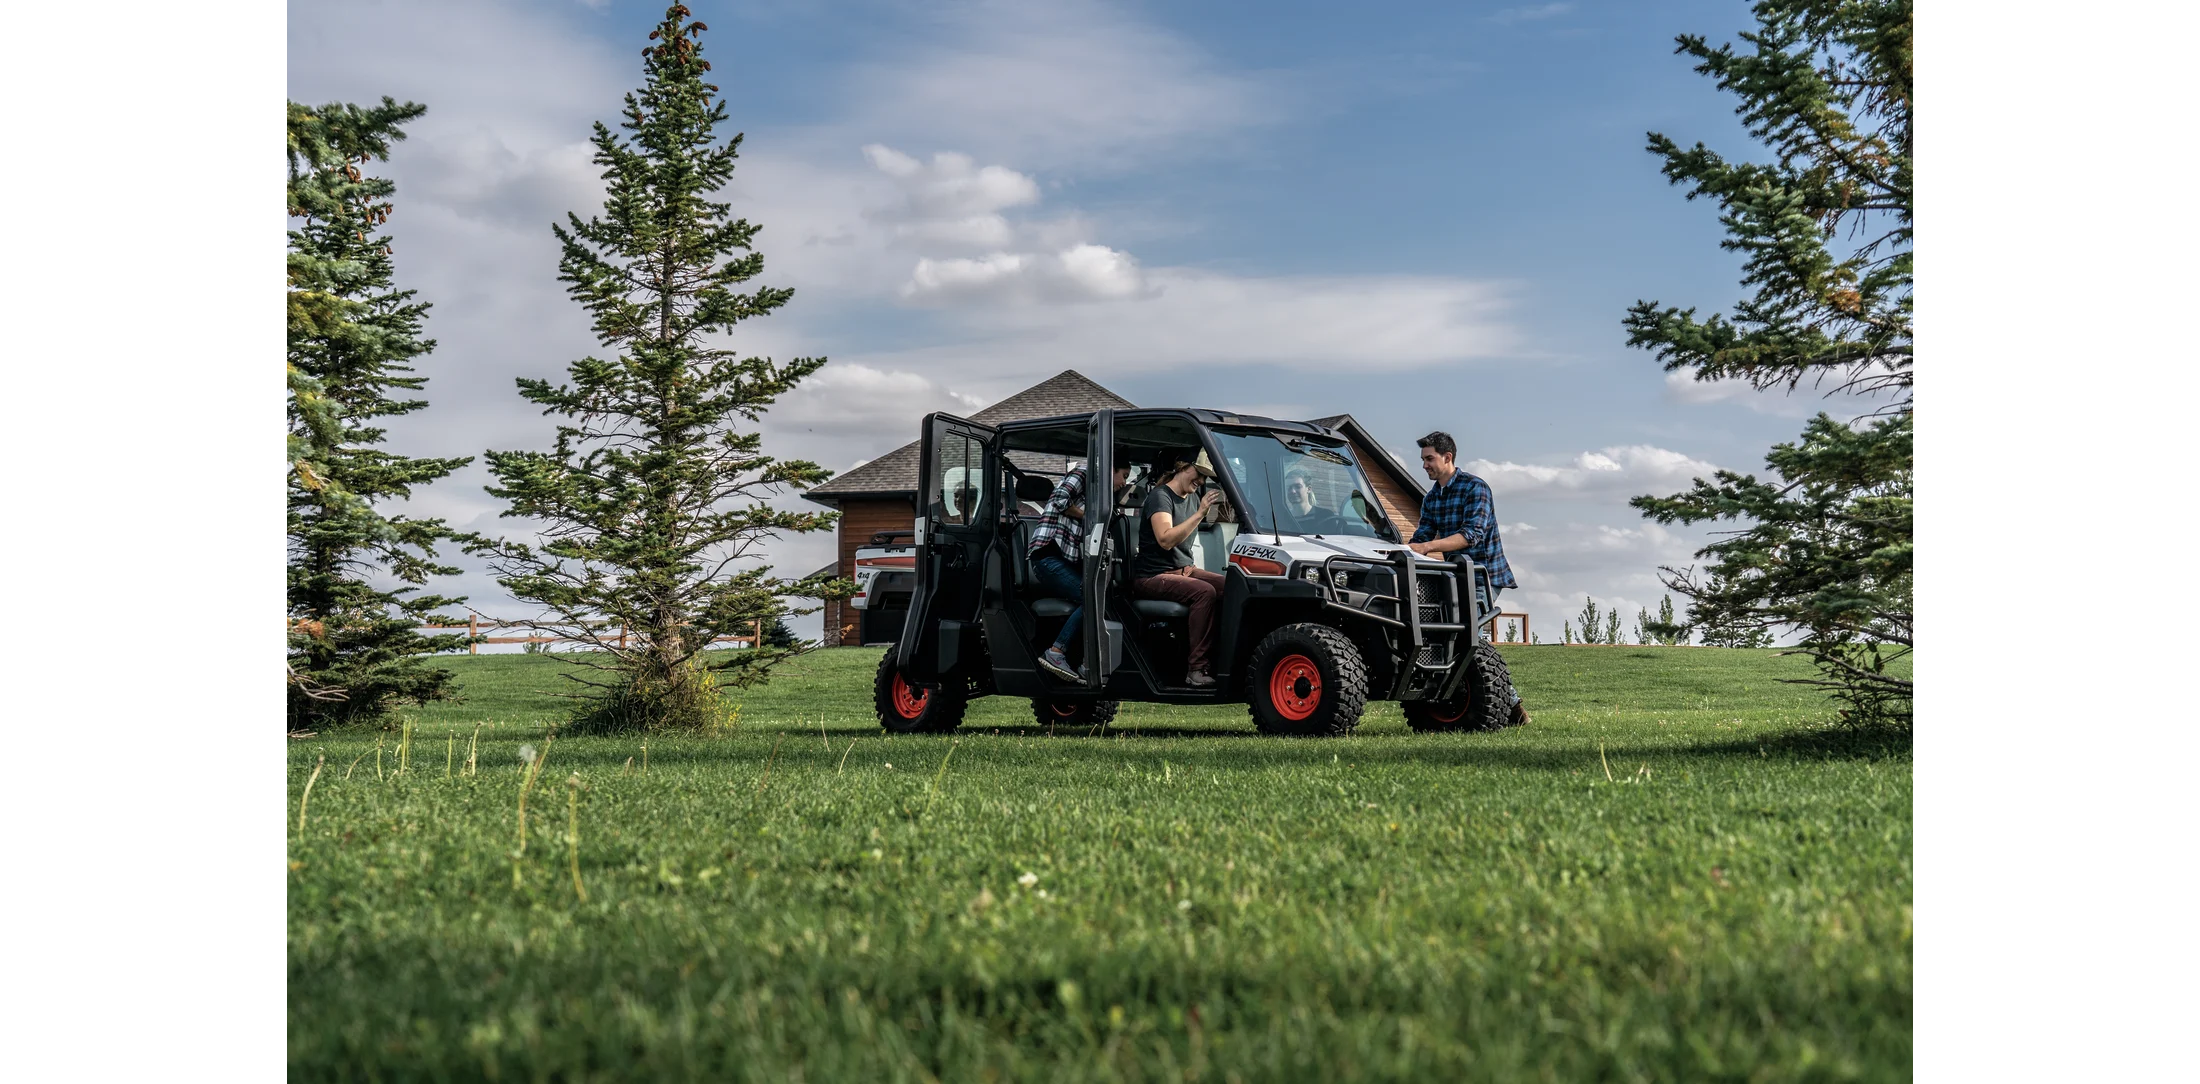 Browse Specs and more for the Bobcat UV34XL (Gas) Utility Vehicle - KC Bobcat